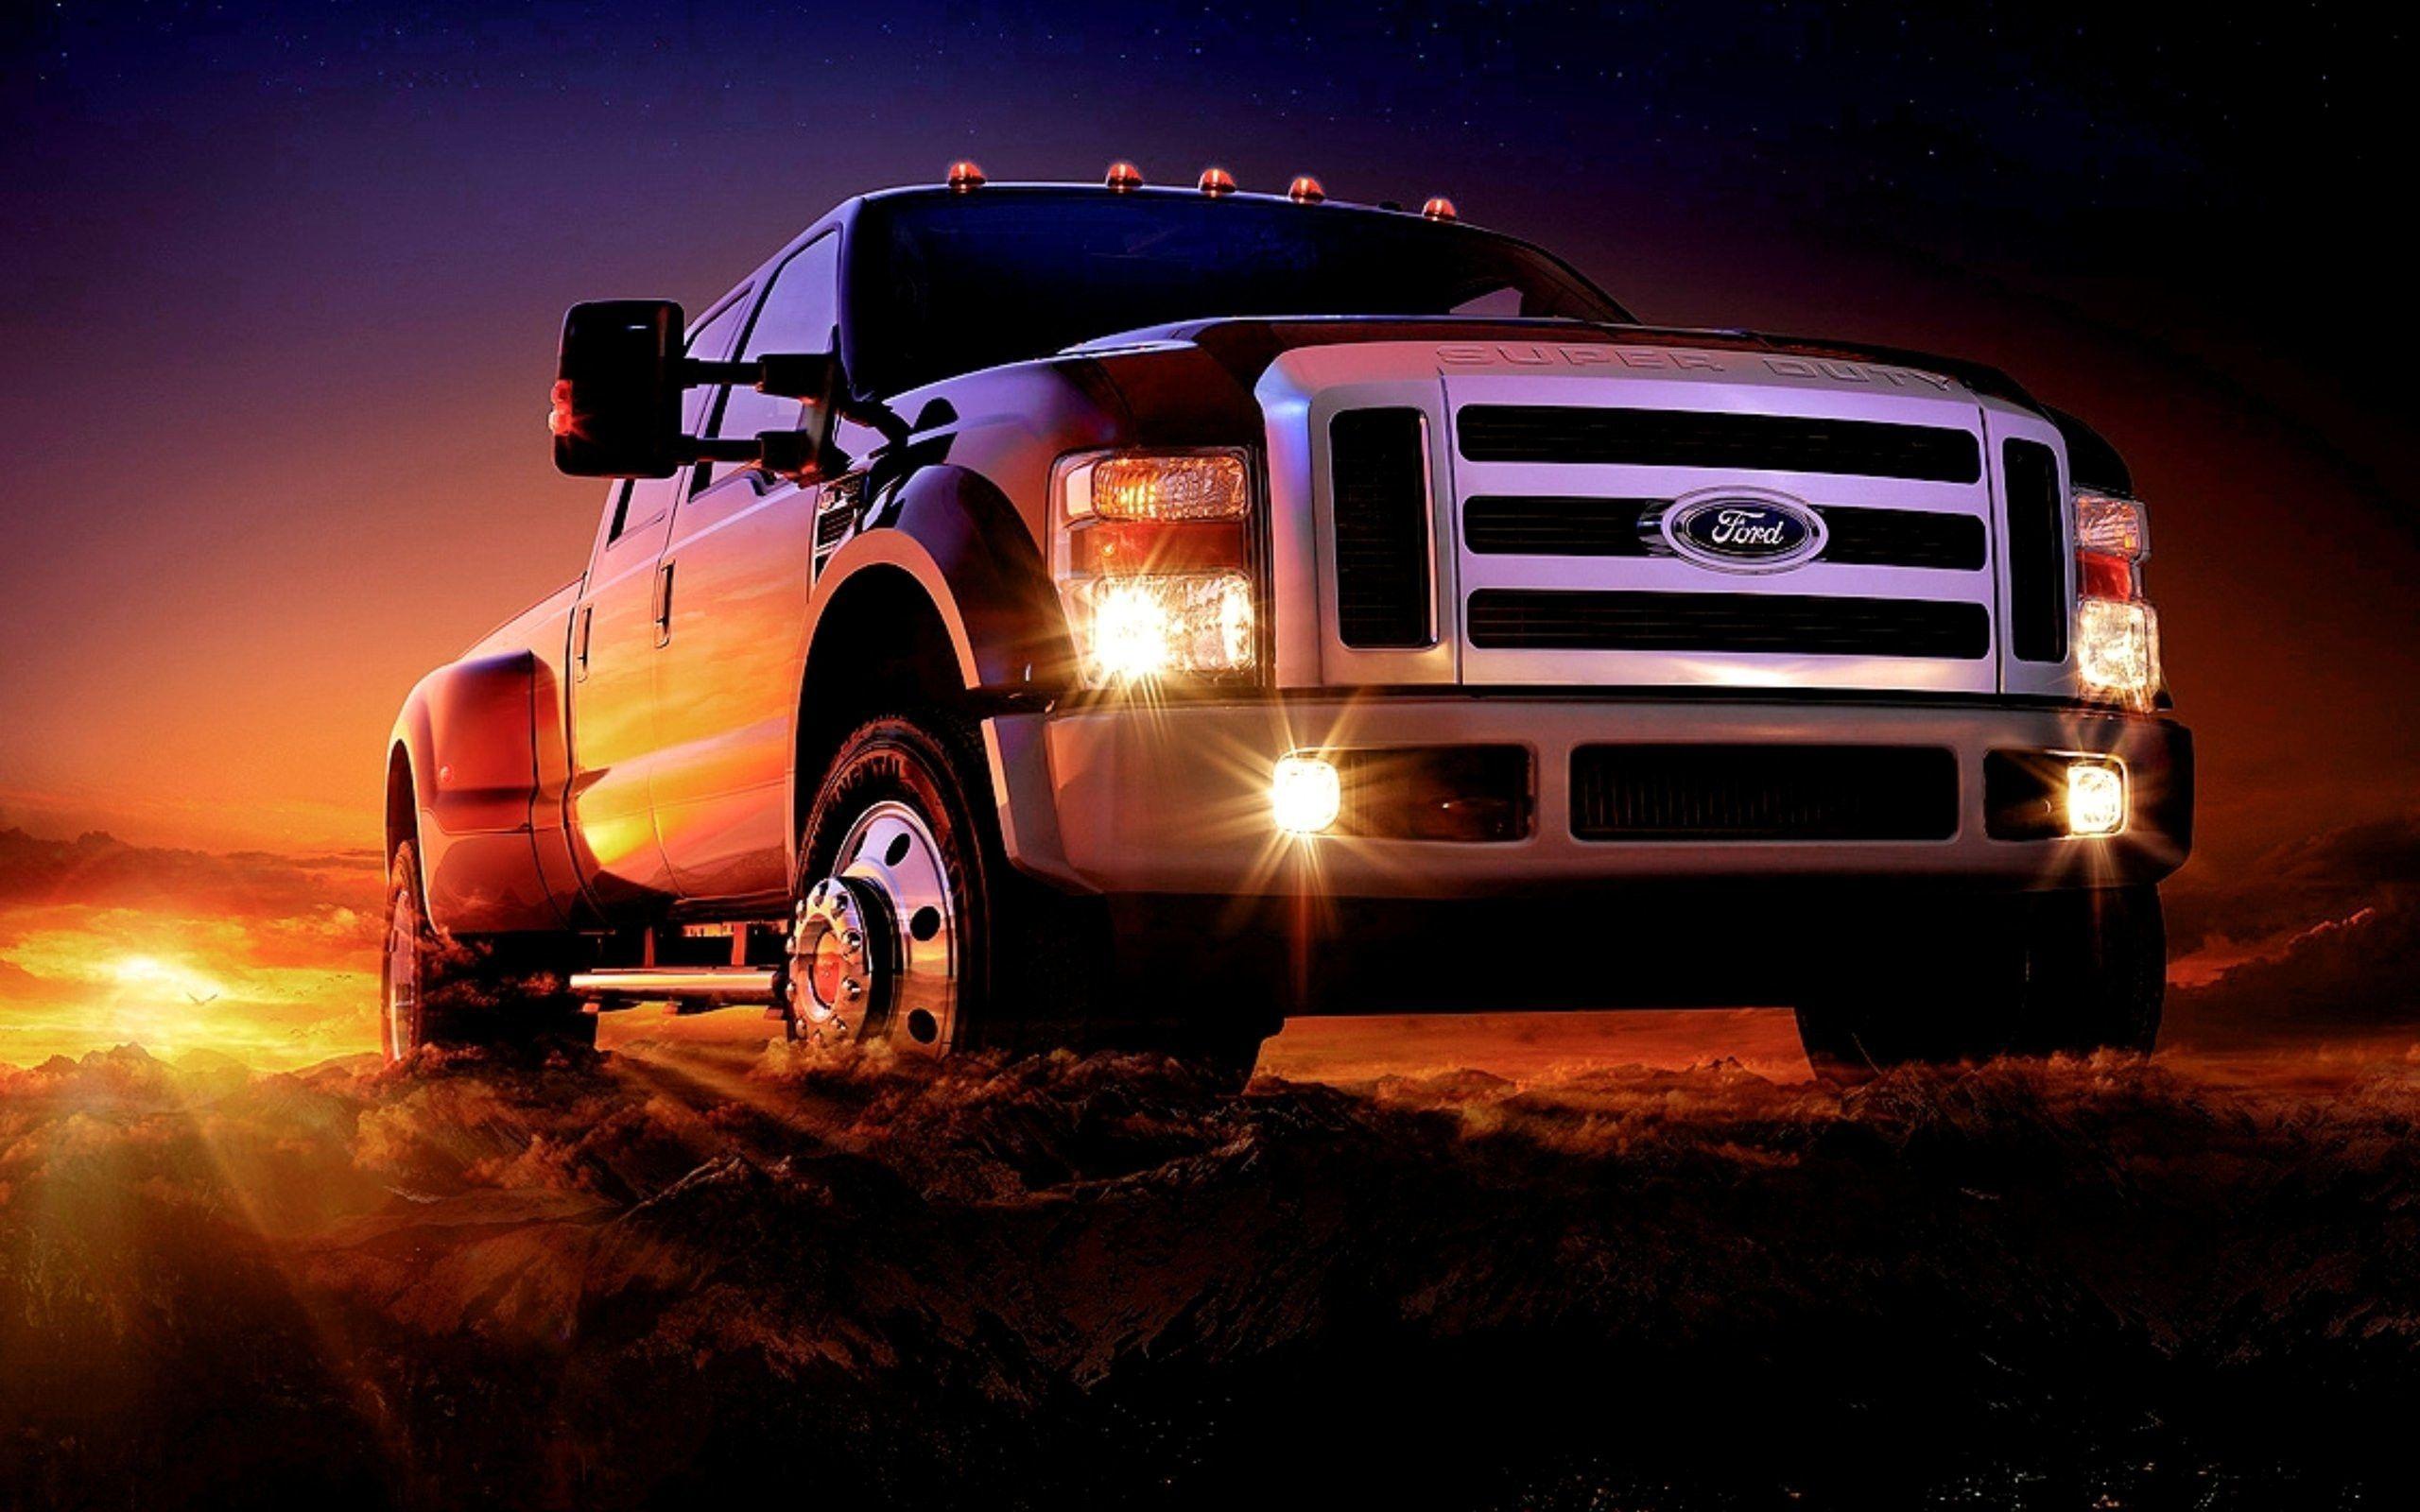 Ford Lifted Truck Wallpapers Image Gallery.